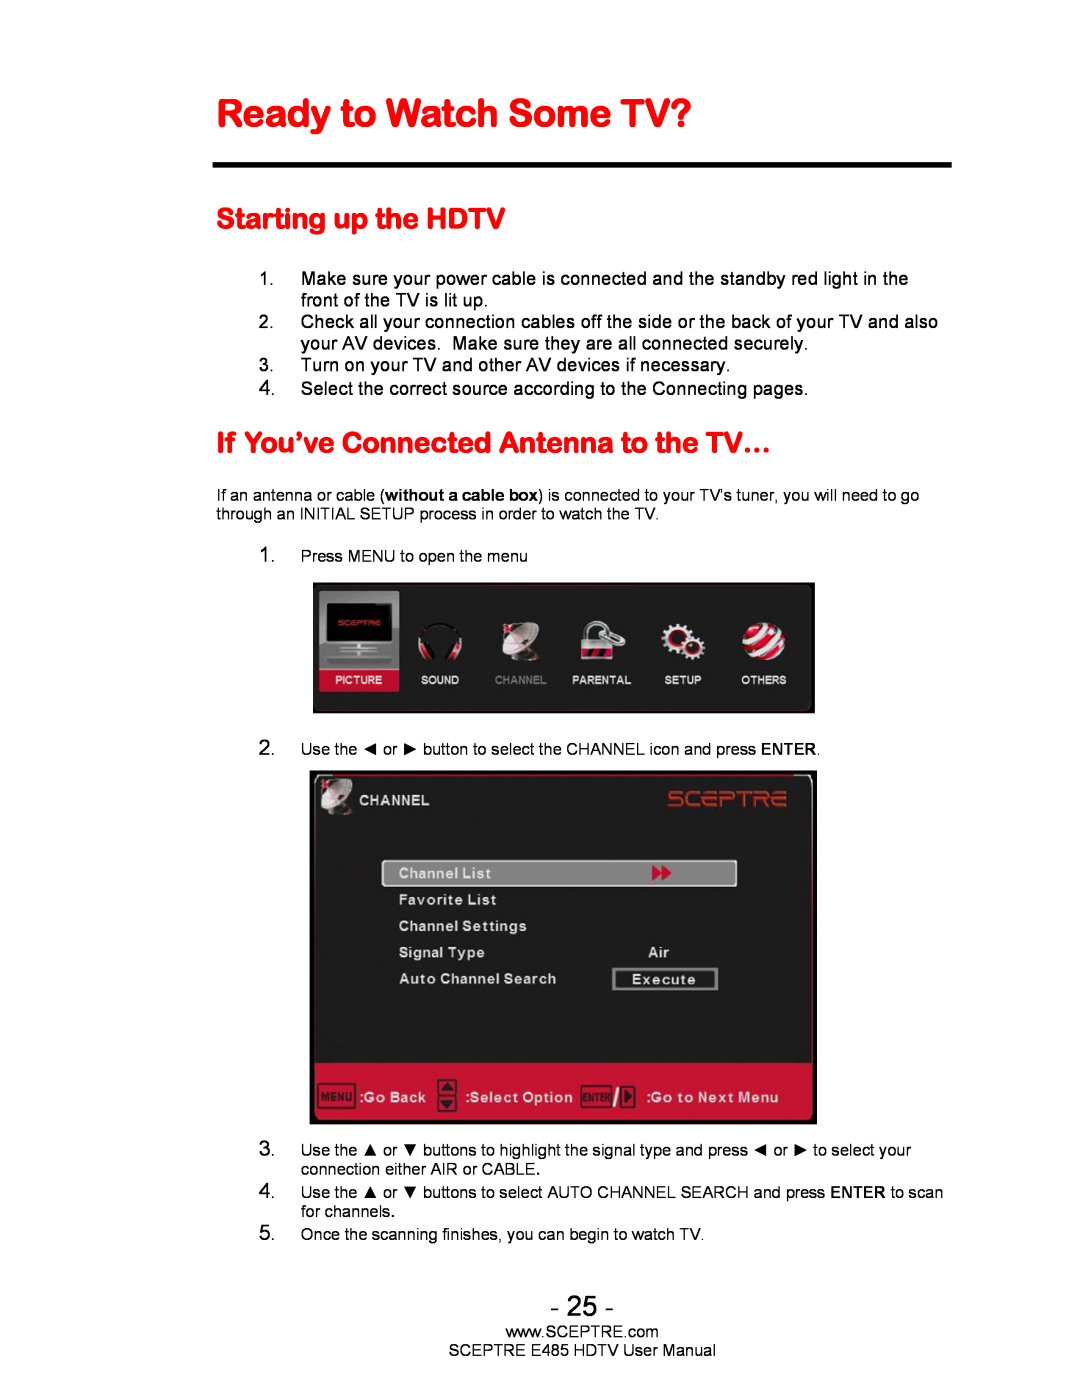 Sceptre Technologies E485 user manual Ready to Watch Some TV?, Starting up the HDTV, If You’ve Connected Antenna to the TV… 